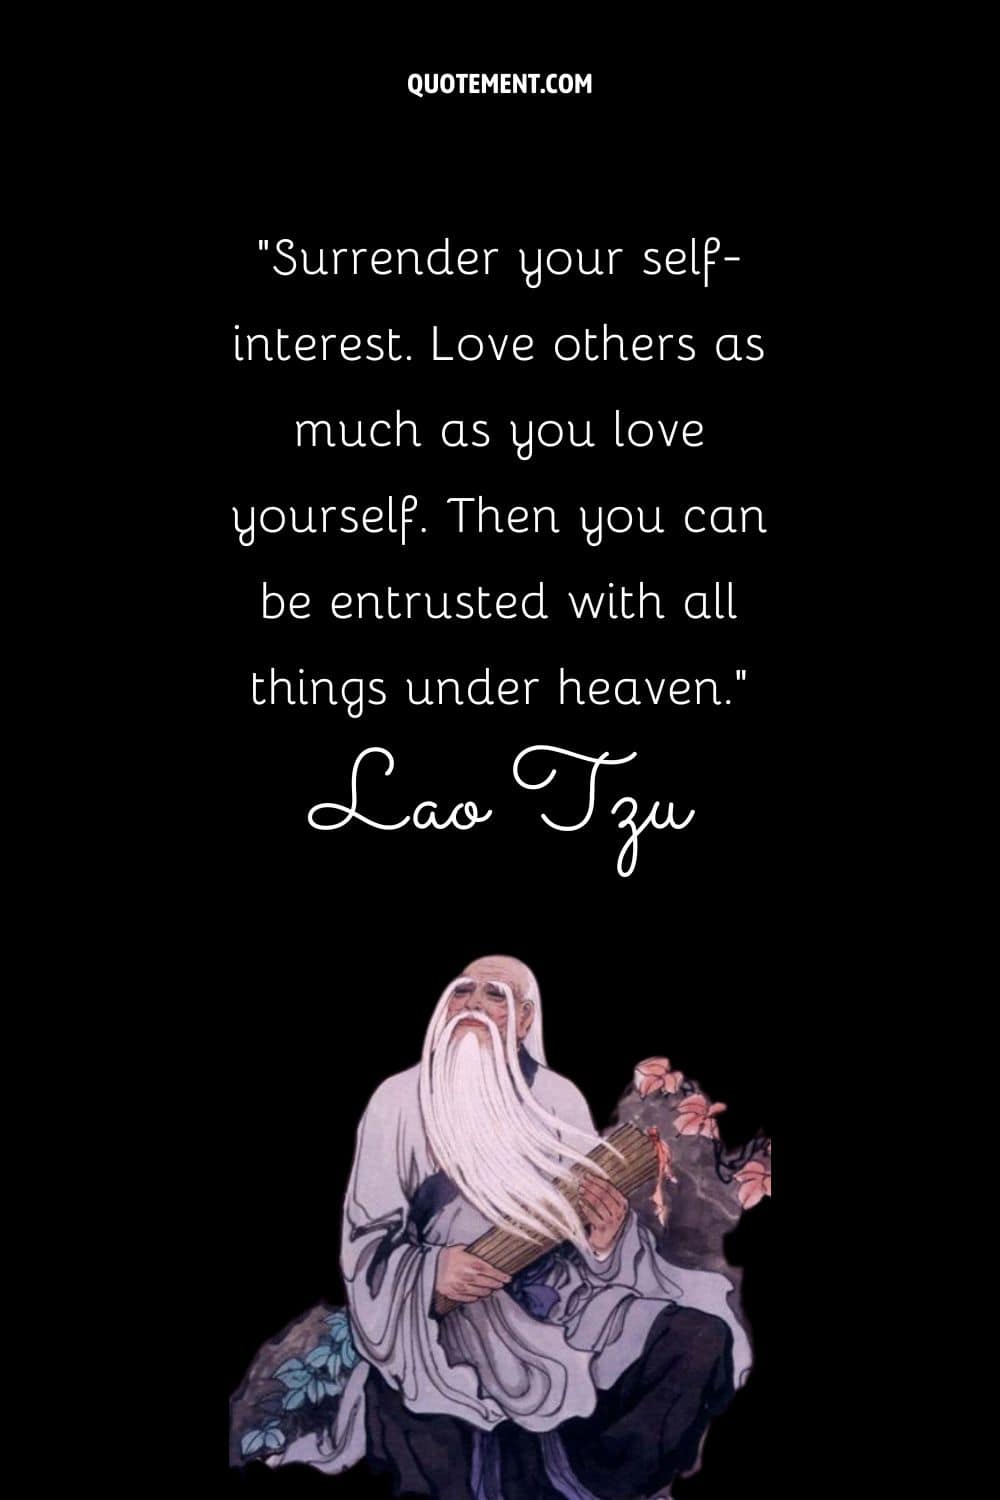 Surrender your self-interest. Love others as much as you love yourself.